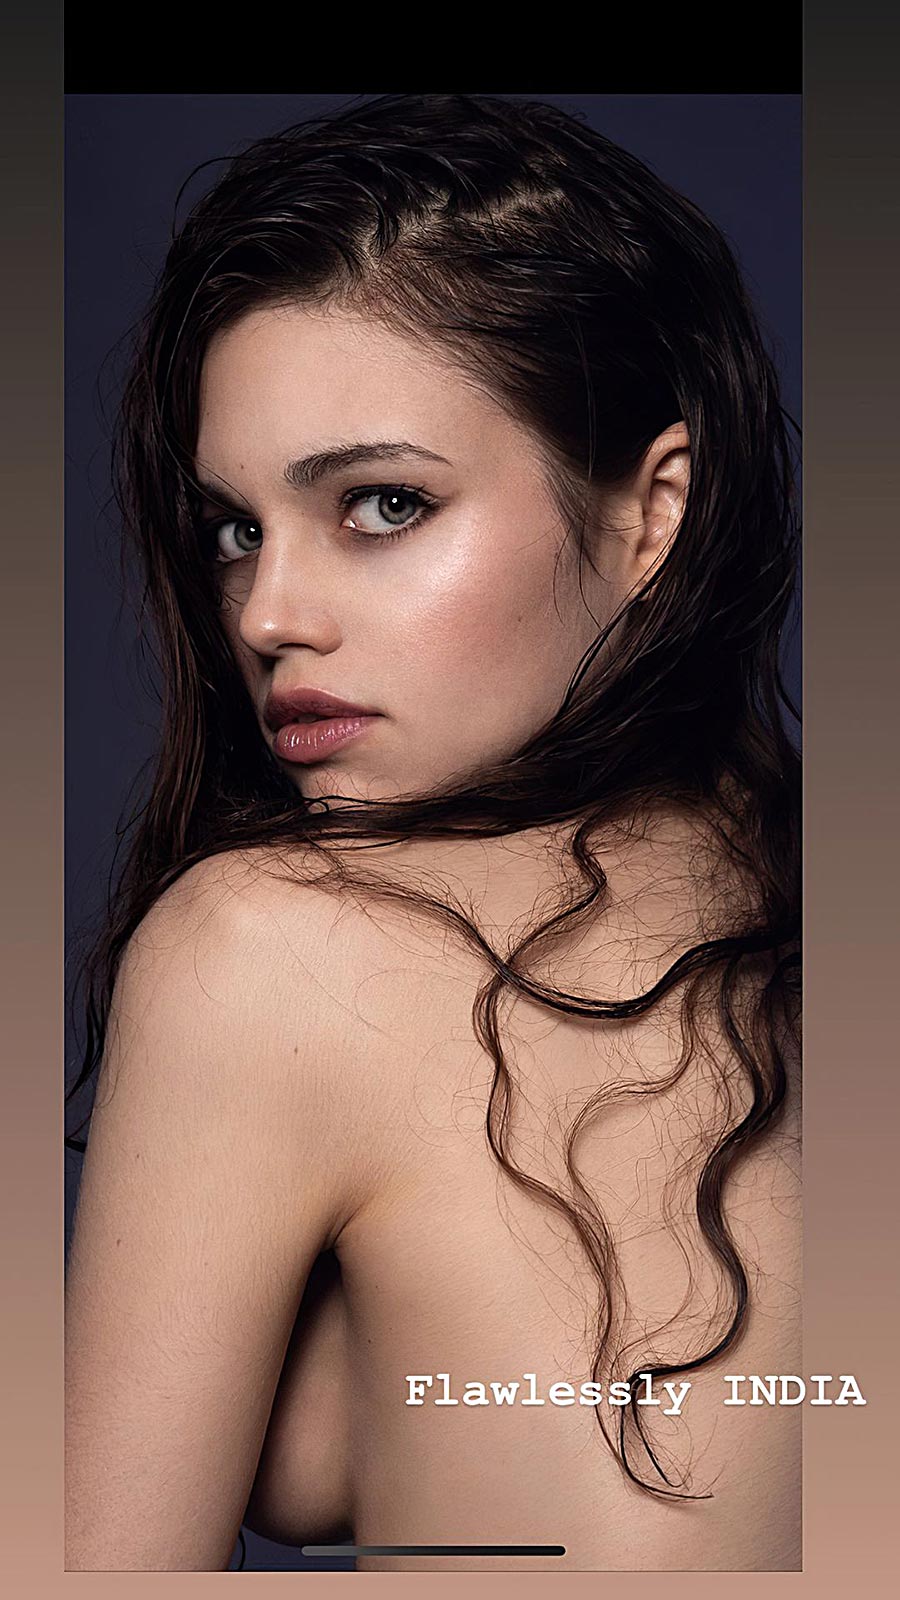 India Eisley Naked - India Eisley Nude and Explicit Sex Scenes from Movies - Scandal Planet